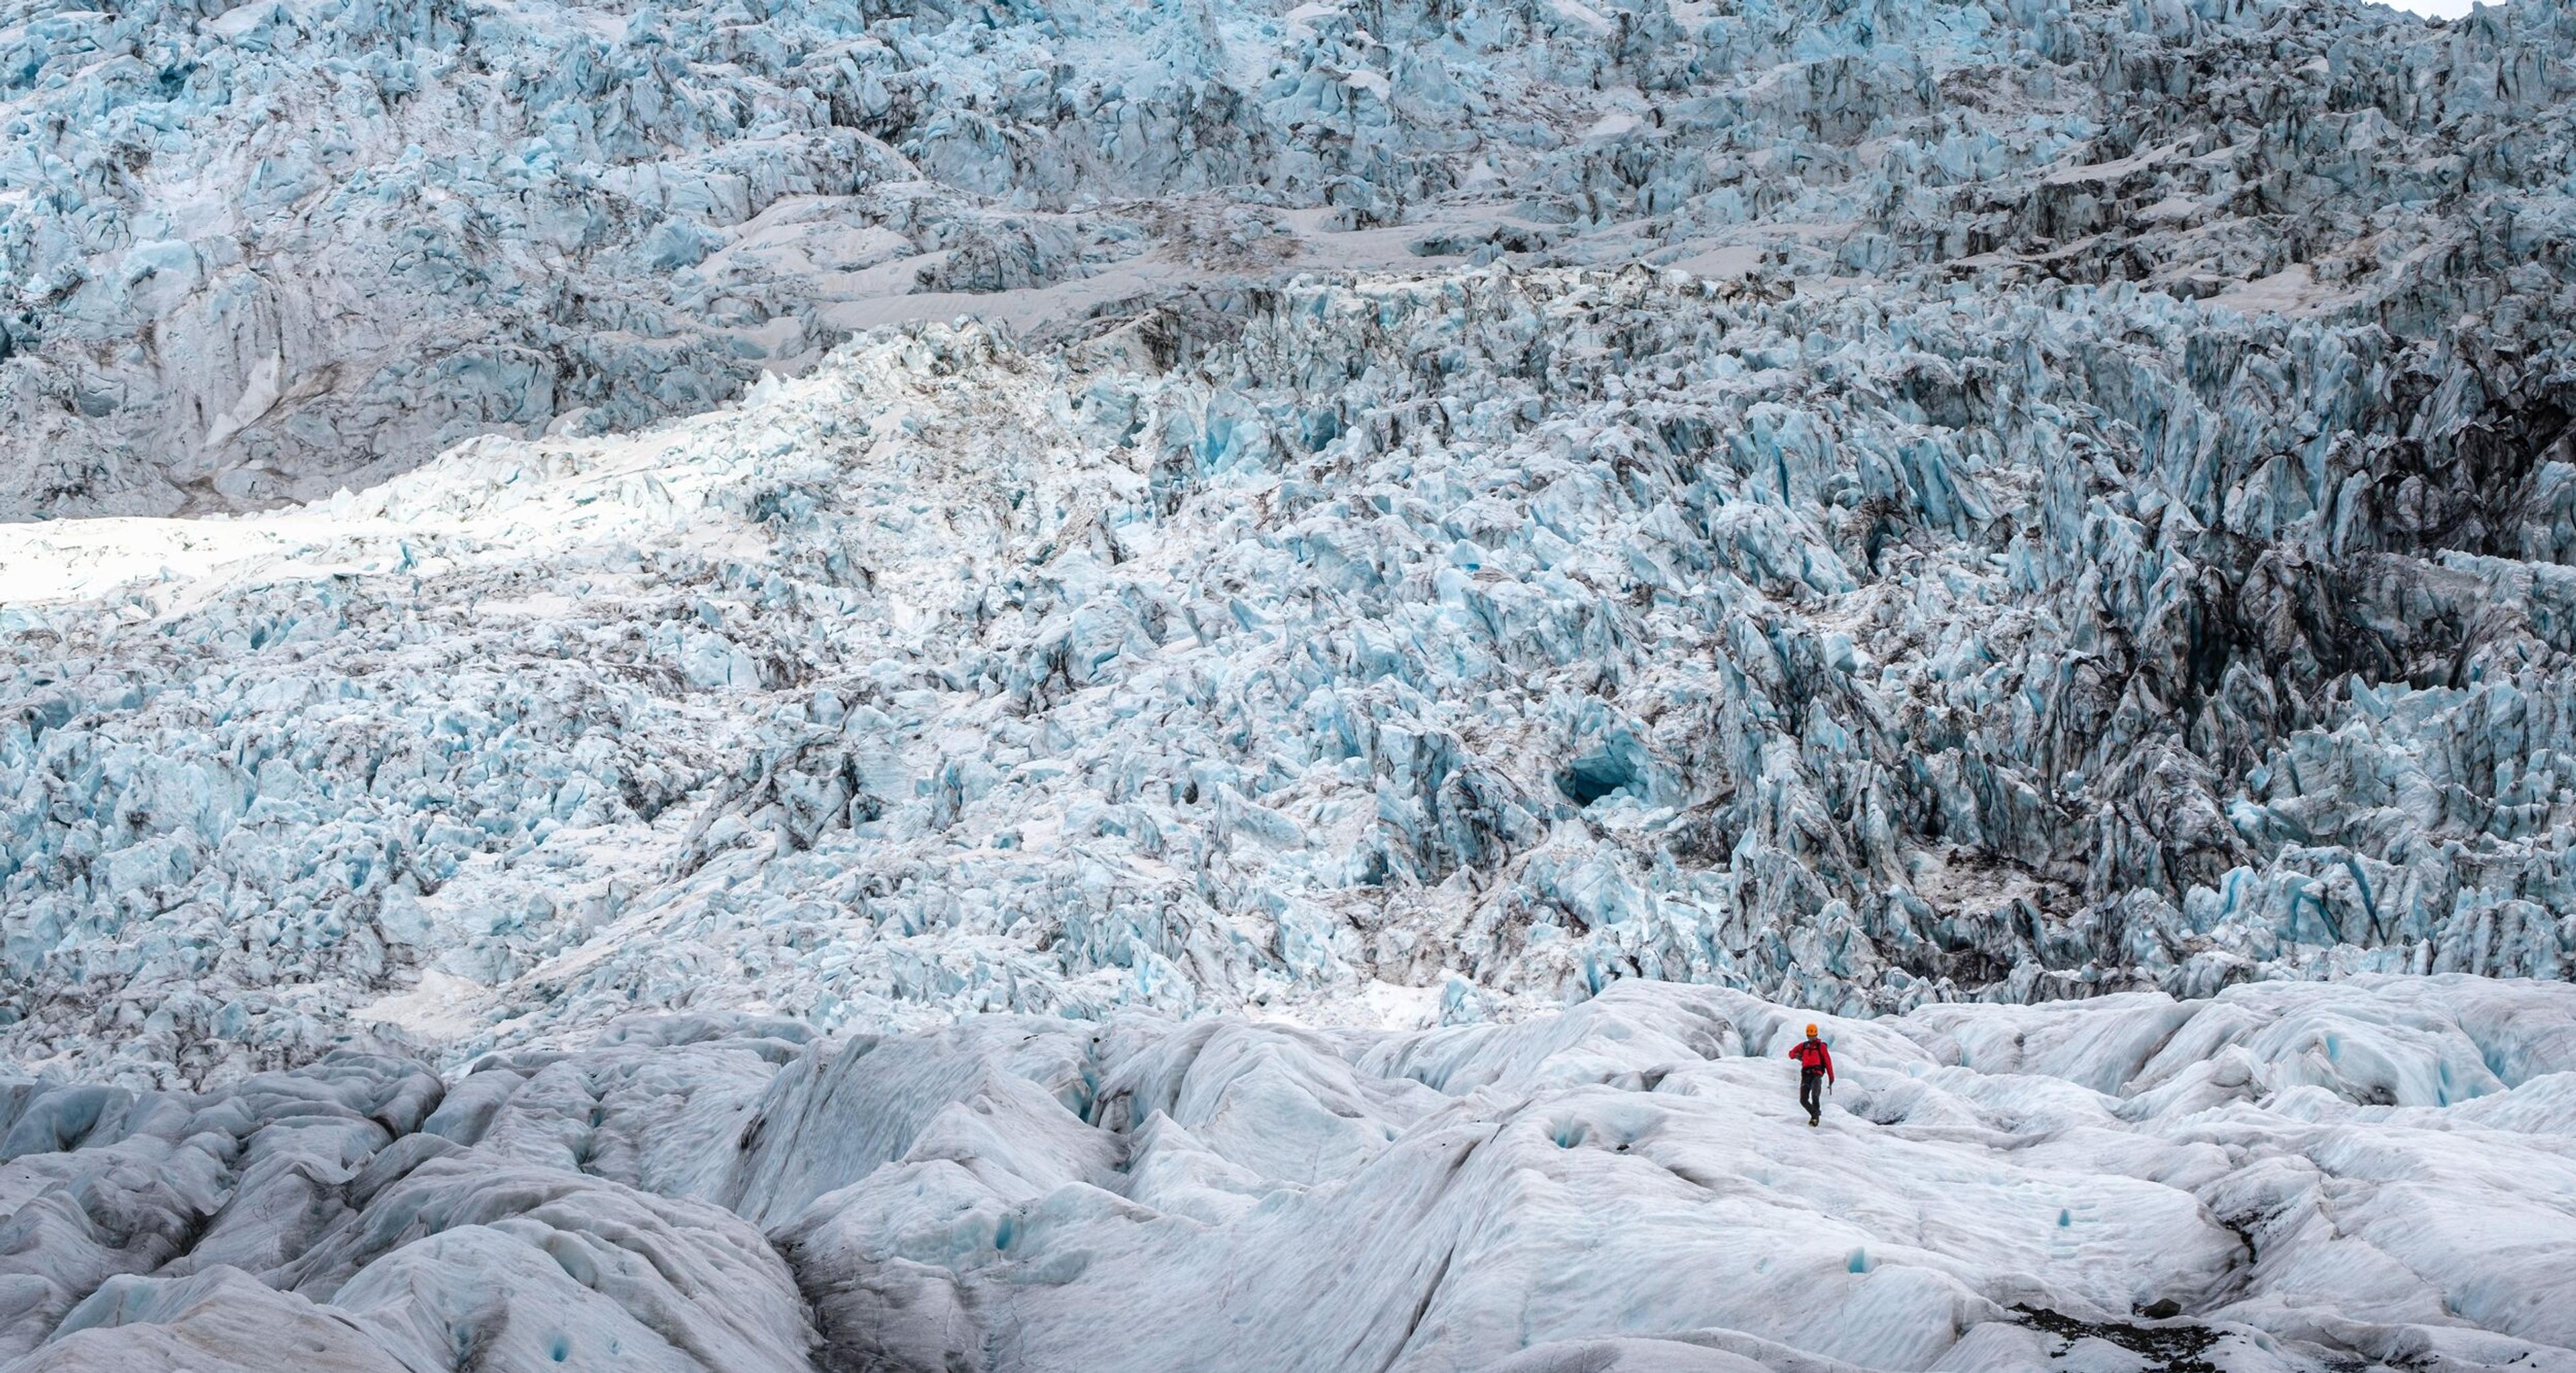 Tiny figure of a hiker amidst the vast and towering ice ridges of Falljökull glacier.